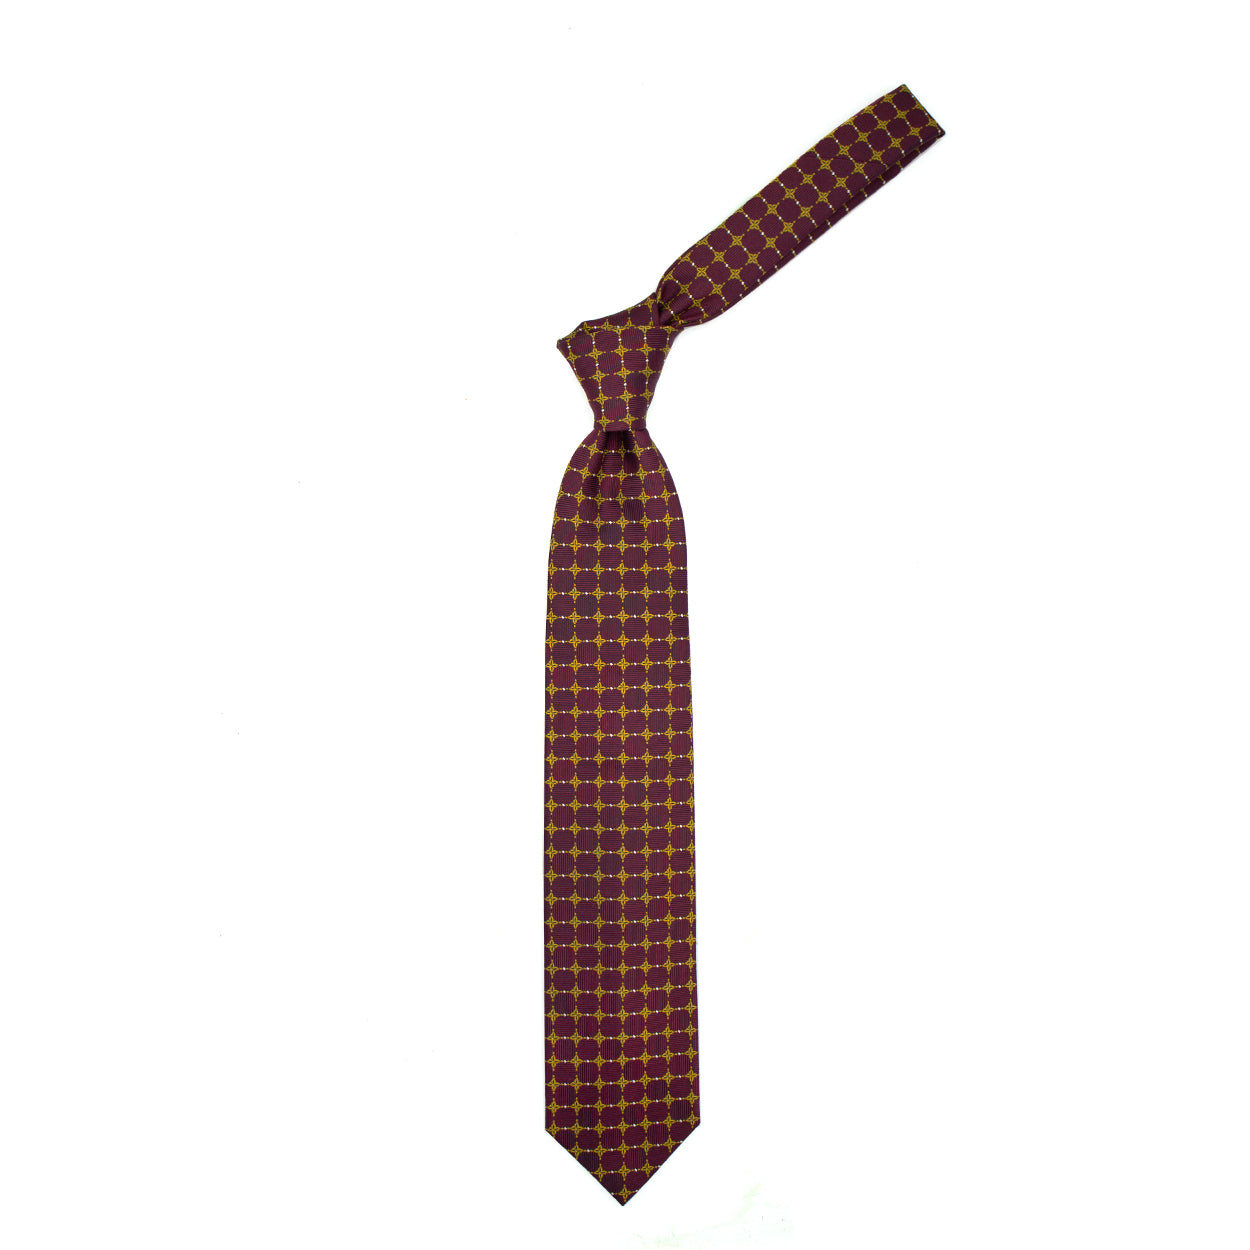 Bordeaux tie with yellow flowers and white squares